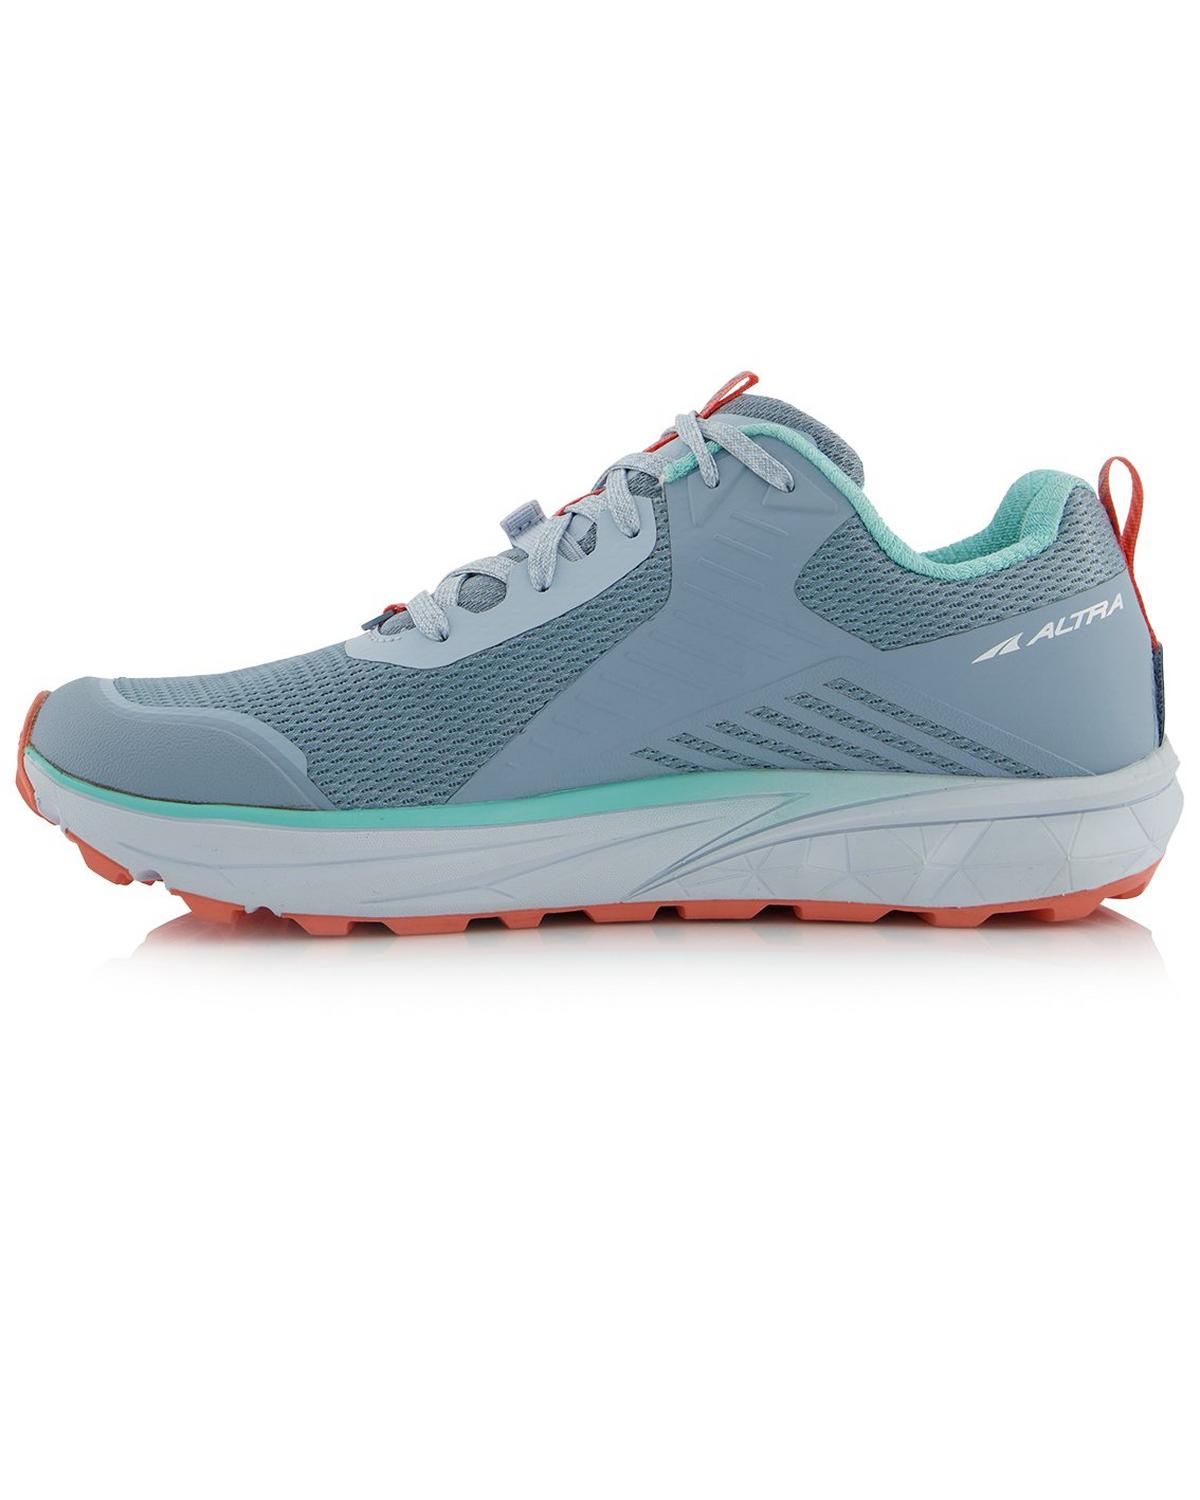 Altra Women’s Timp 3 Trail Running Shoes -  Grey